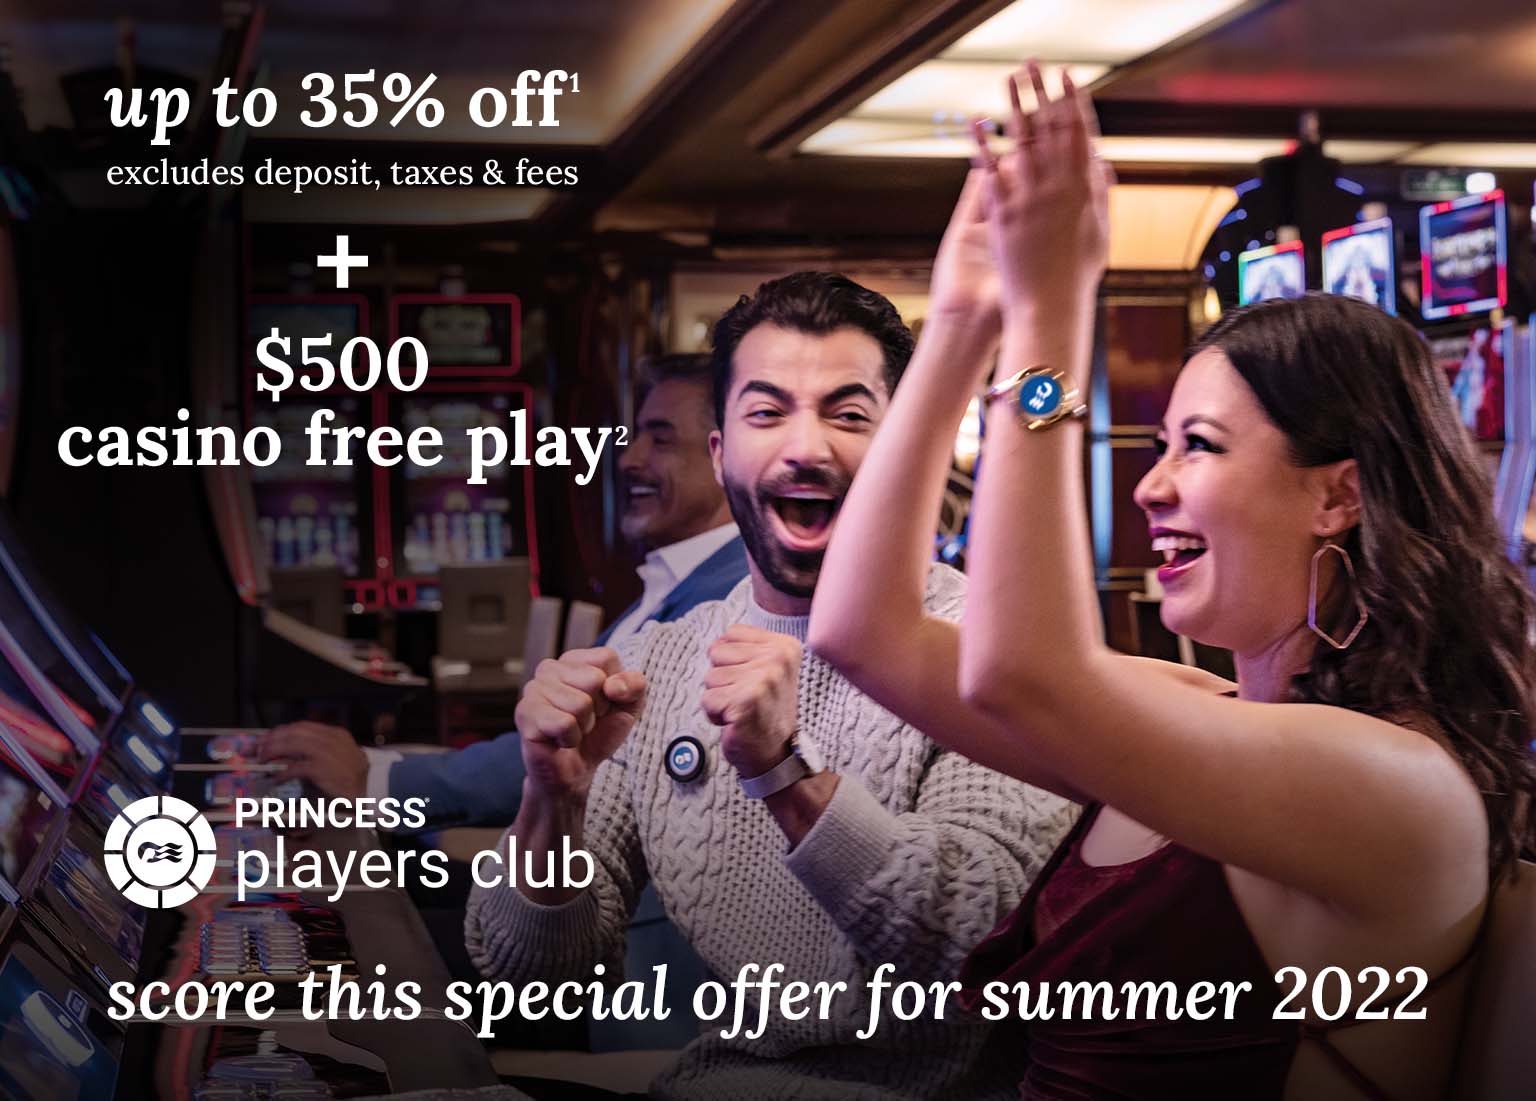 up to 35% off + $500 casino free play. Click here to book.